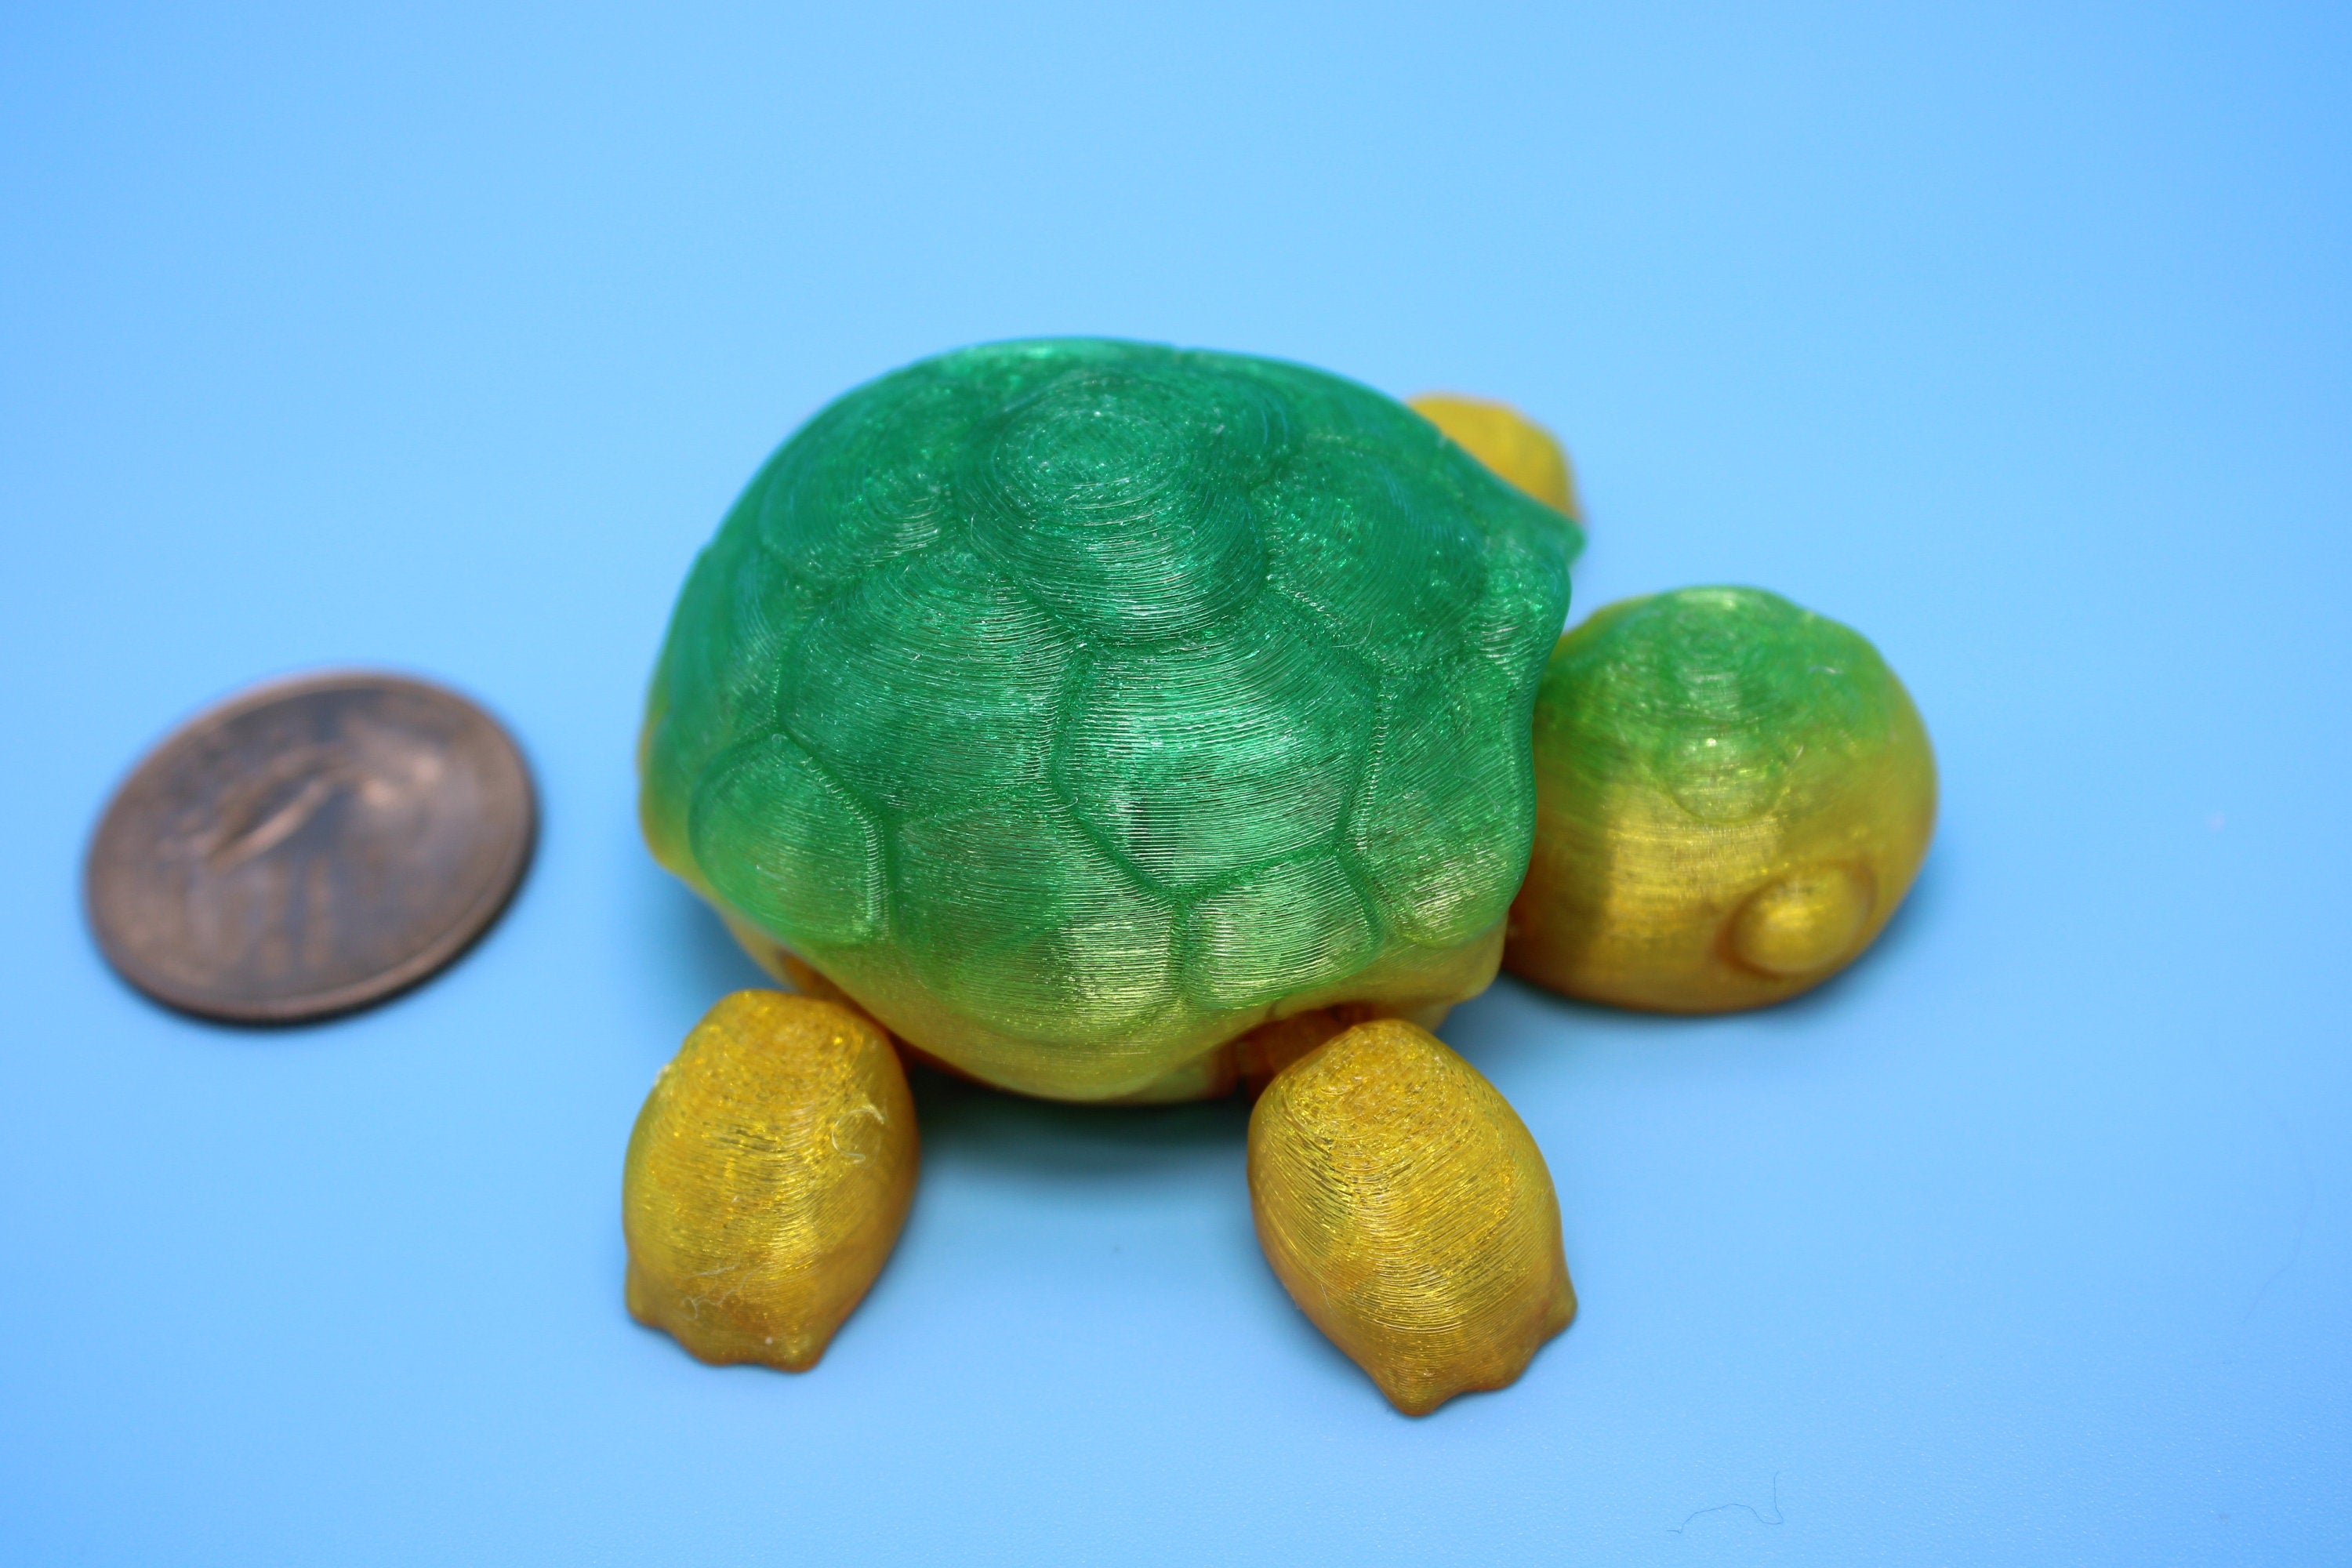 Miniature Flexible Articulating Turtle | 3D Printed Cute Turtle with heart on shell | Friendly Reptile | Sensory Toy | Fidget Toy. (TPU)